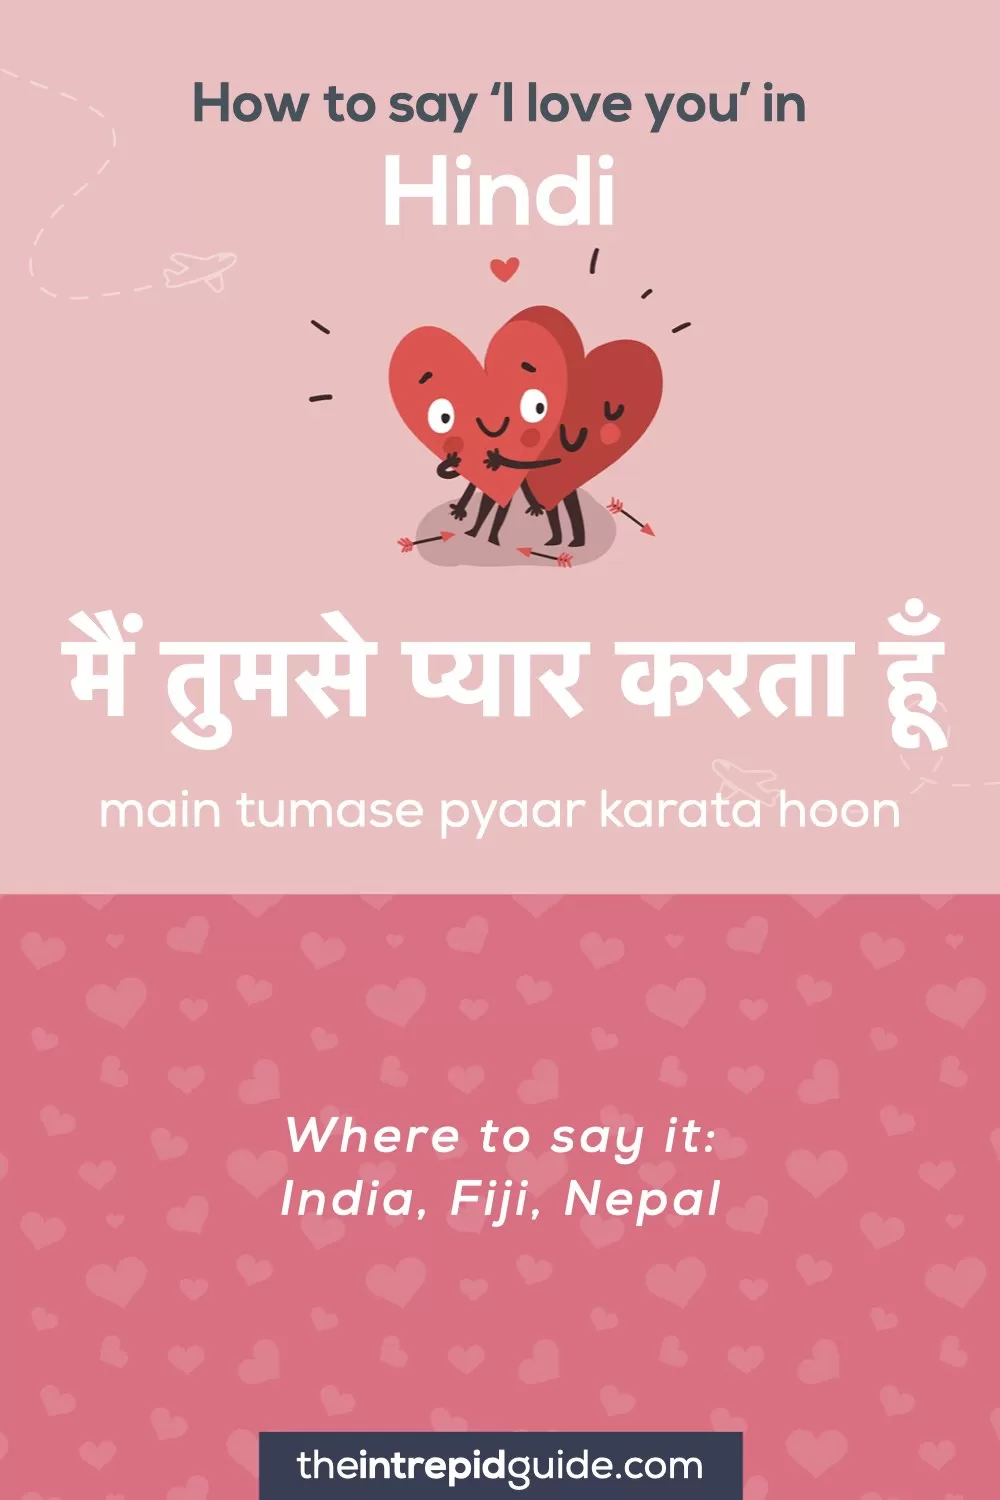 How to say I love you in different languages - Hindi - मैं तुमसे प्यार करता हूँ